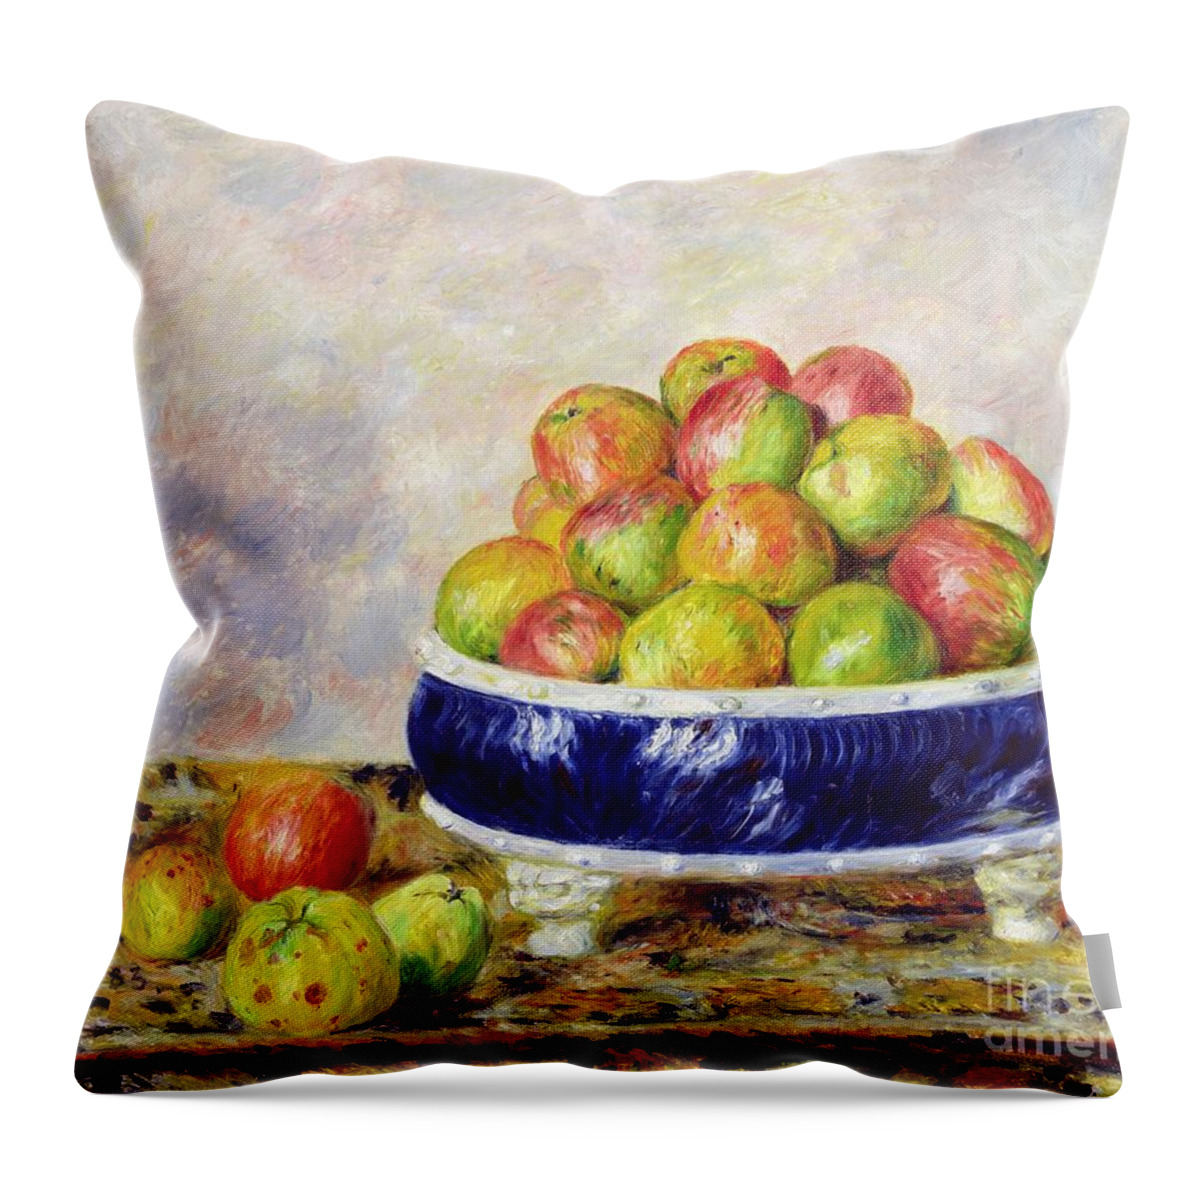  Pierre Auguste Renoir Throw Pillow featuring the painting Apples in a Dish by Pierre Auguste Renoir